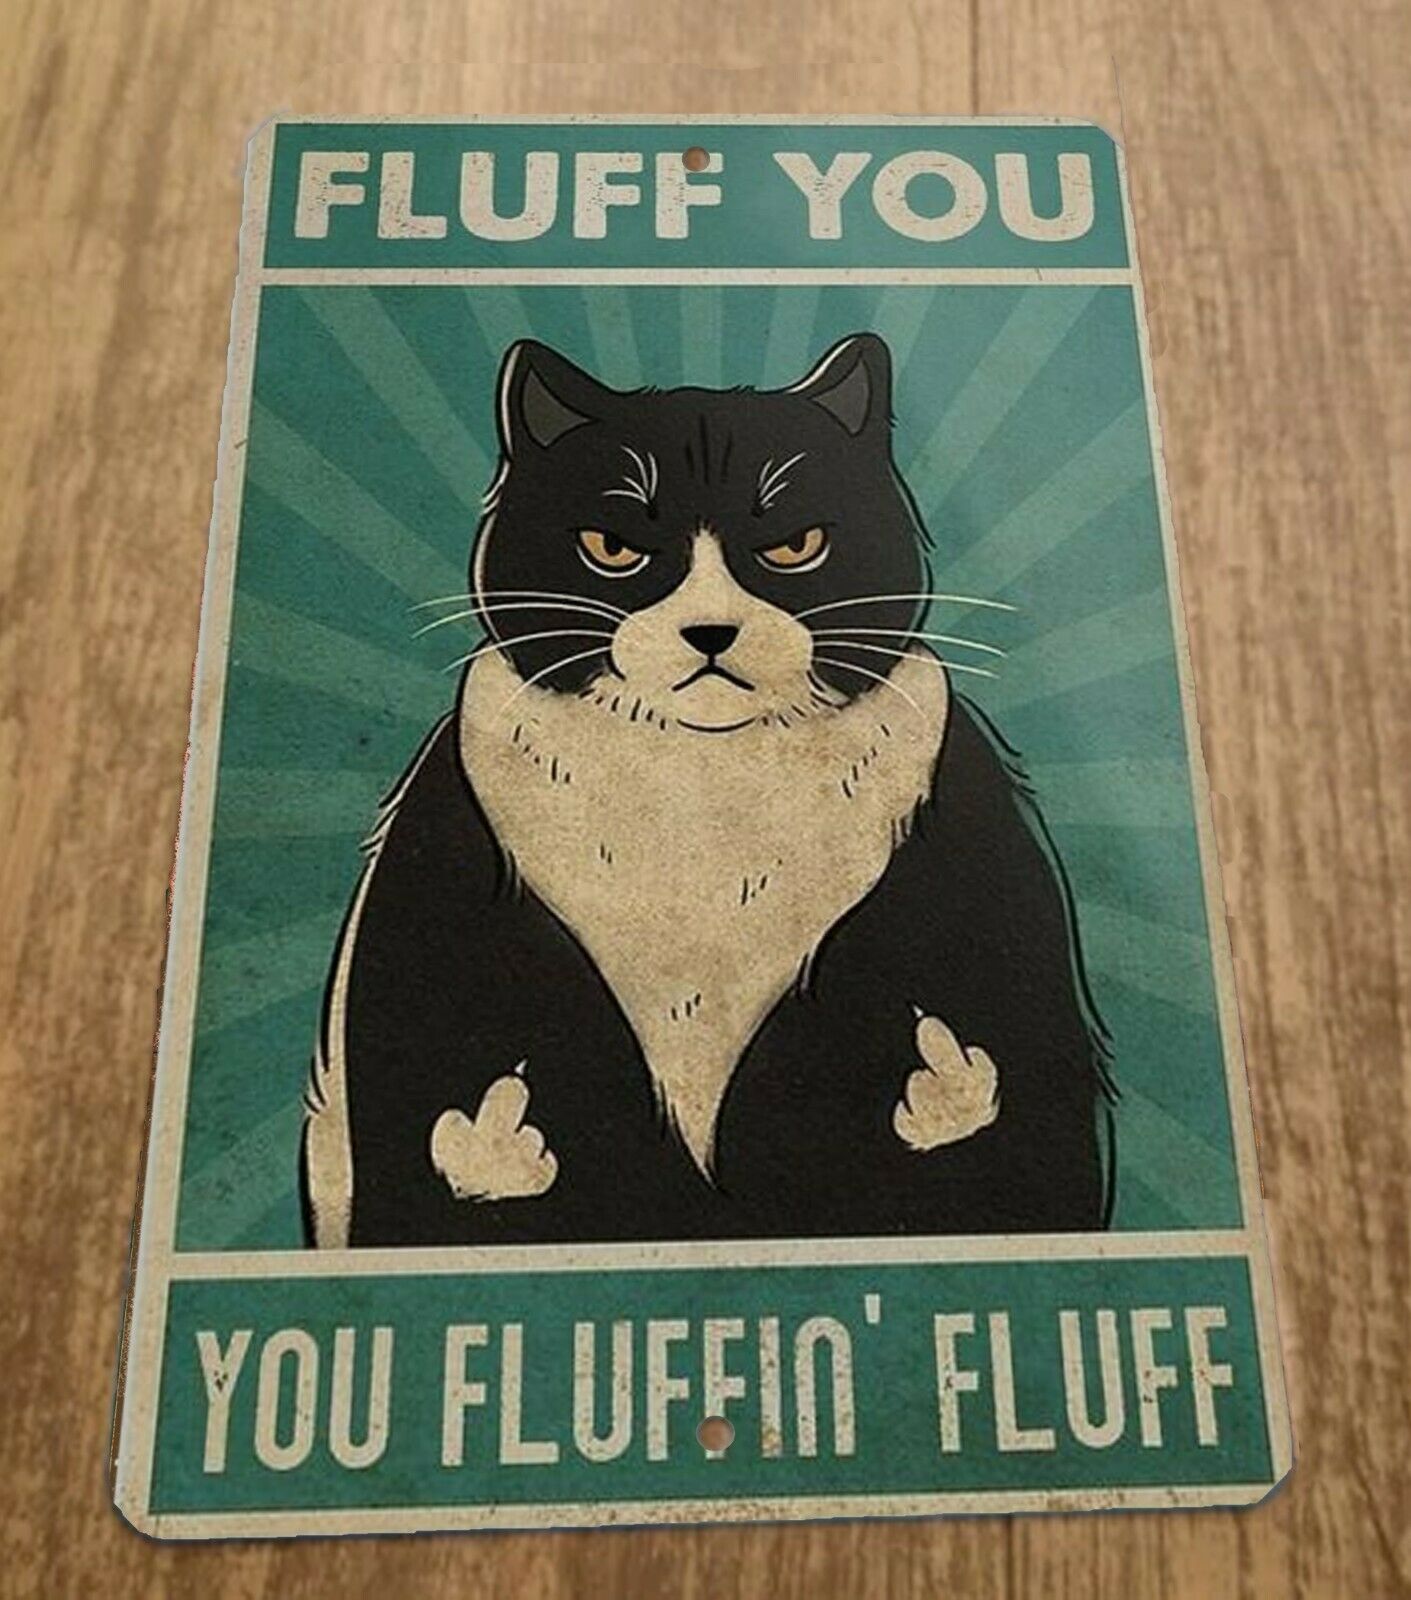 Fluff You You Fluffin Fluff 8x12 Metal Wall Sign Cat Animals